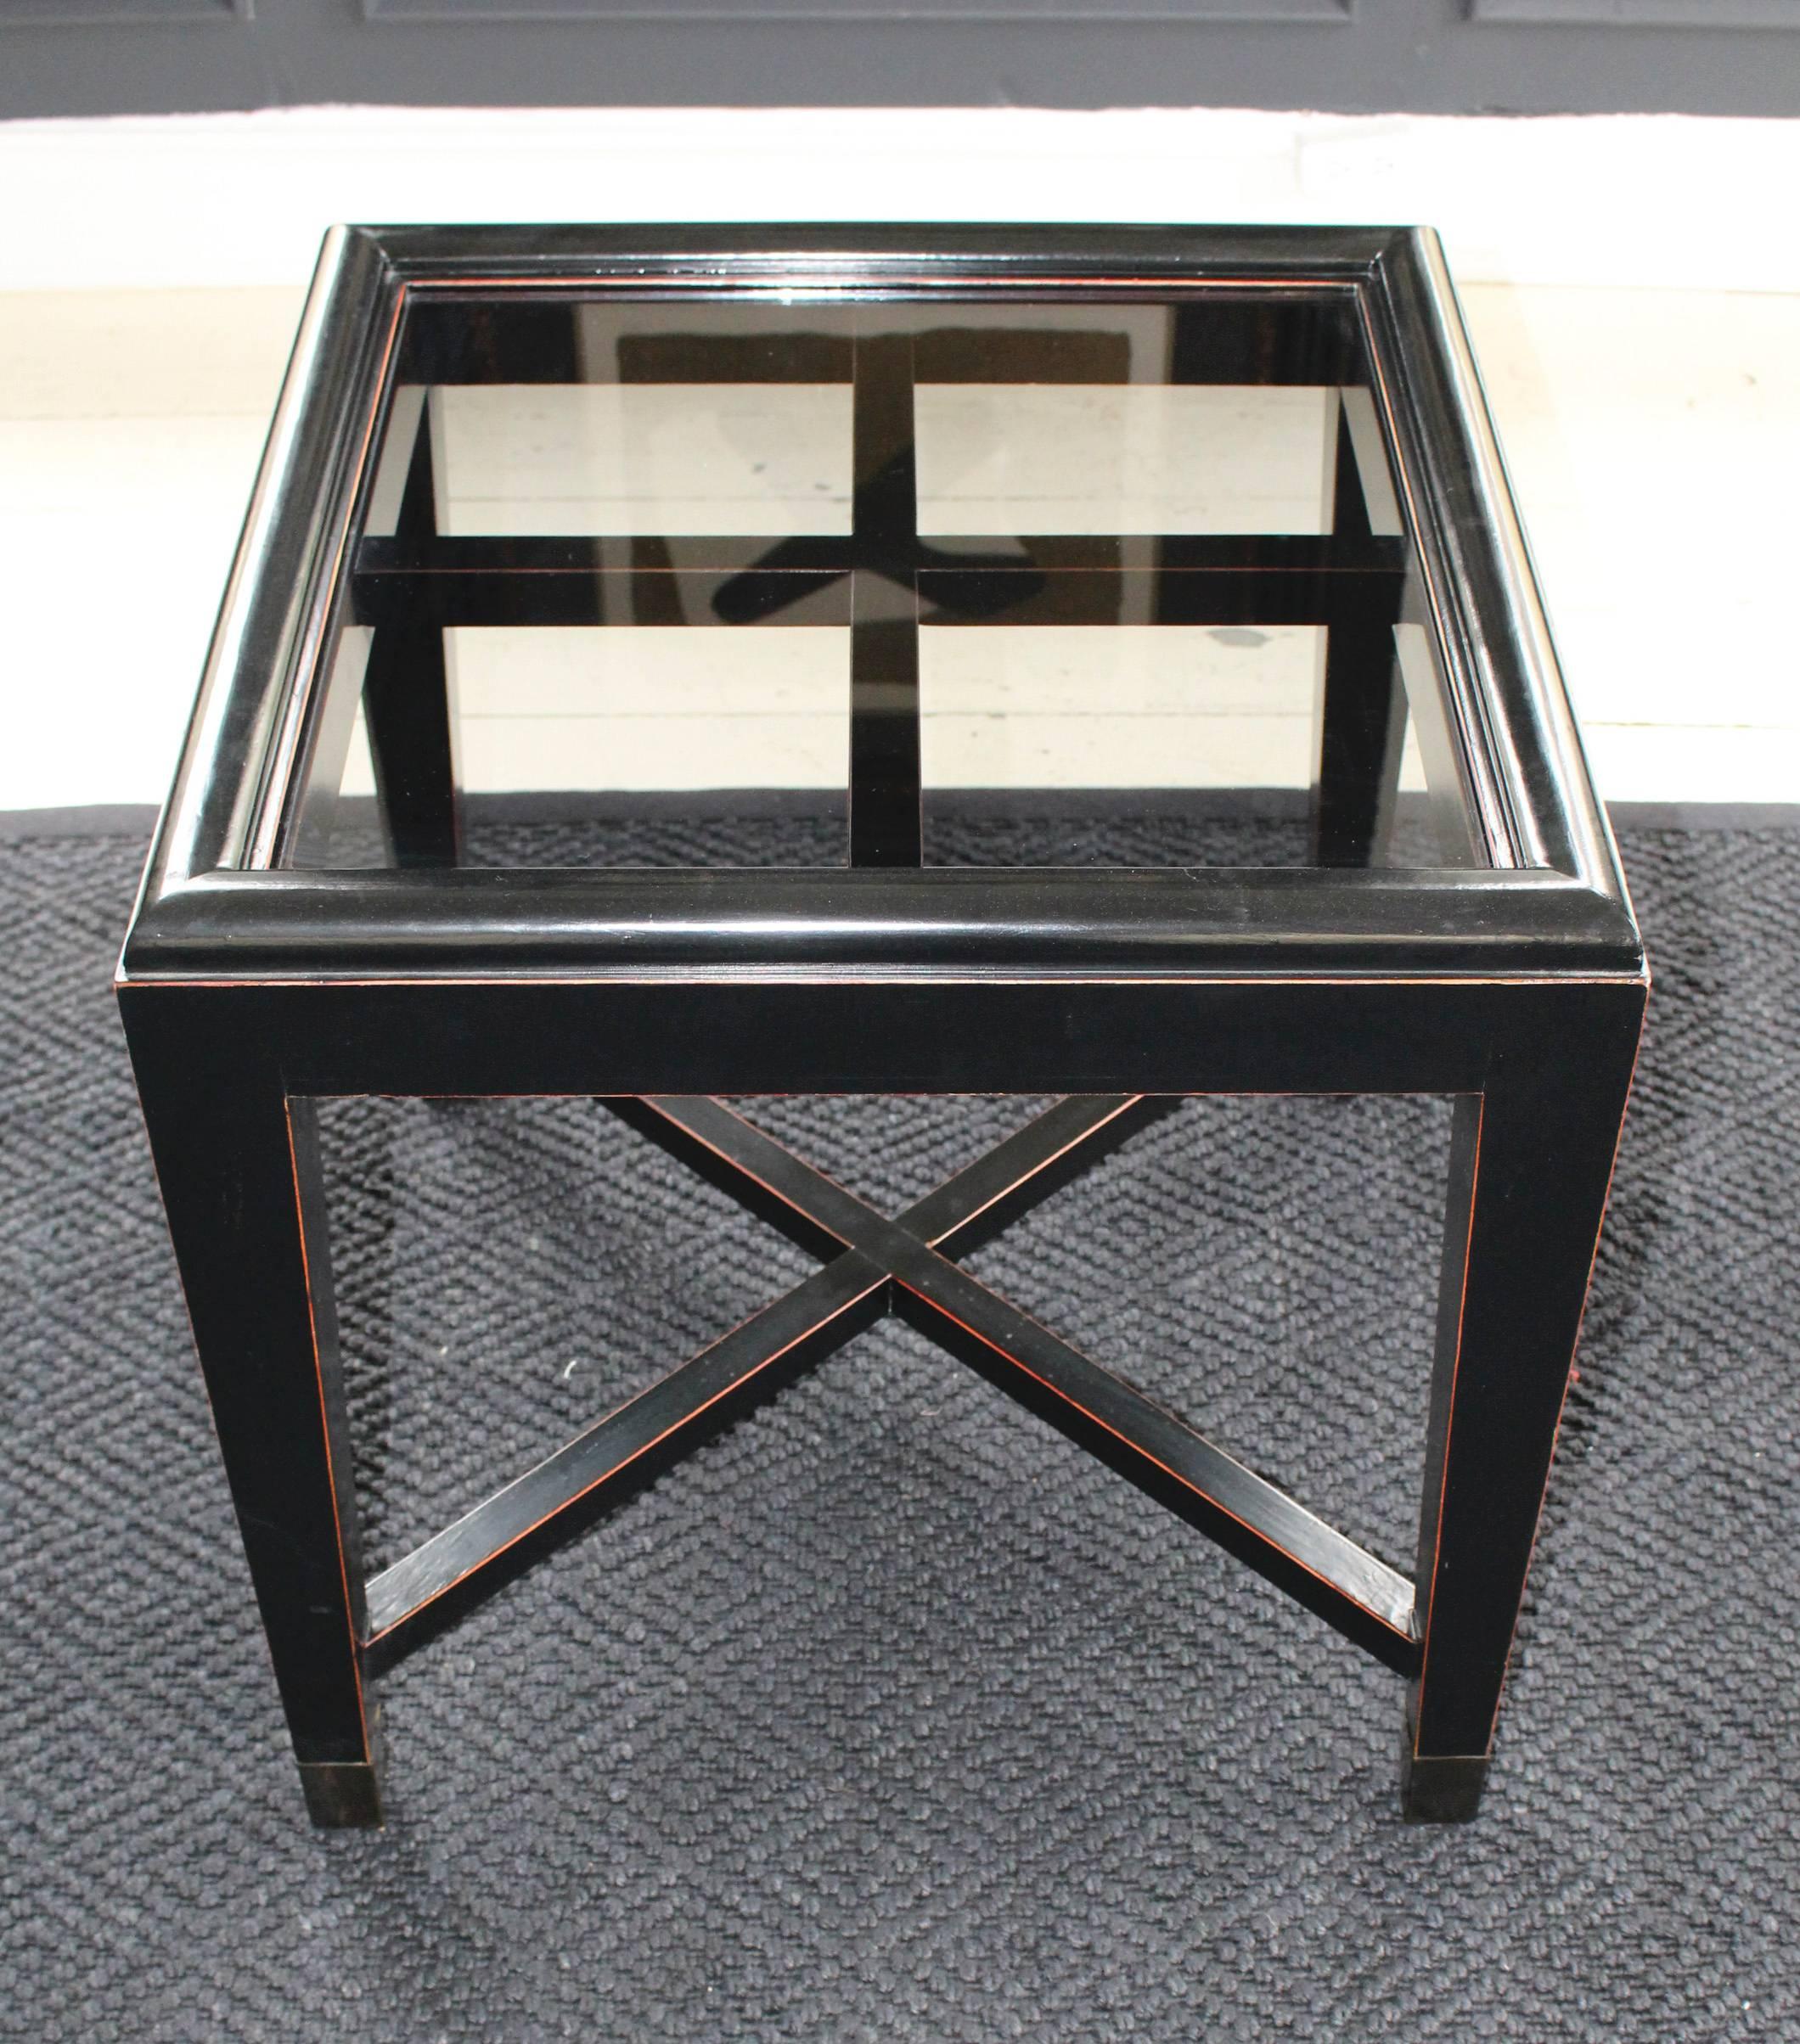 Unknown Pair of Vintage Ebonized Asian-Inspired Tables